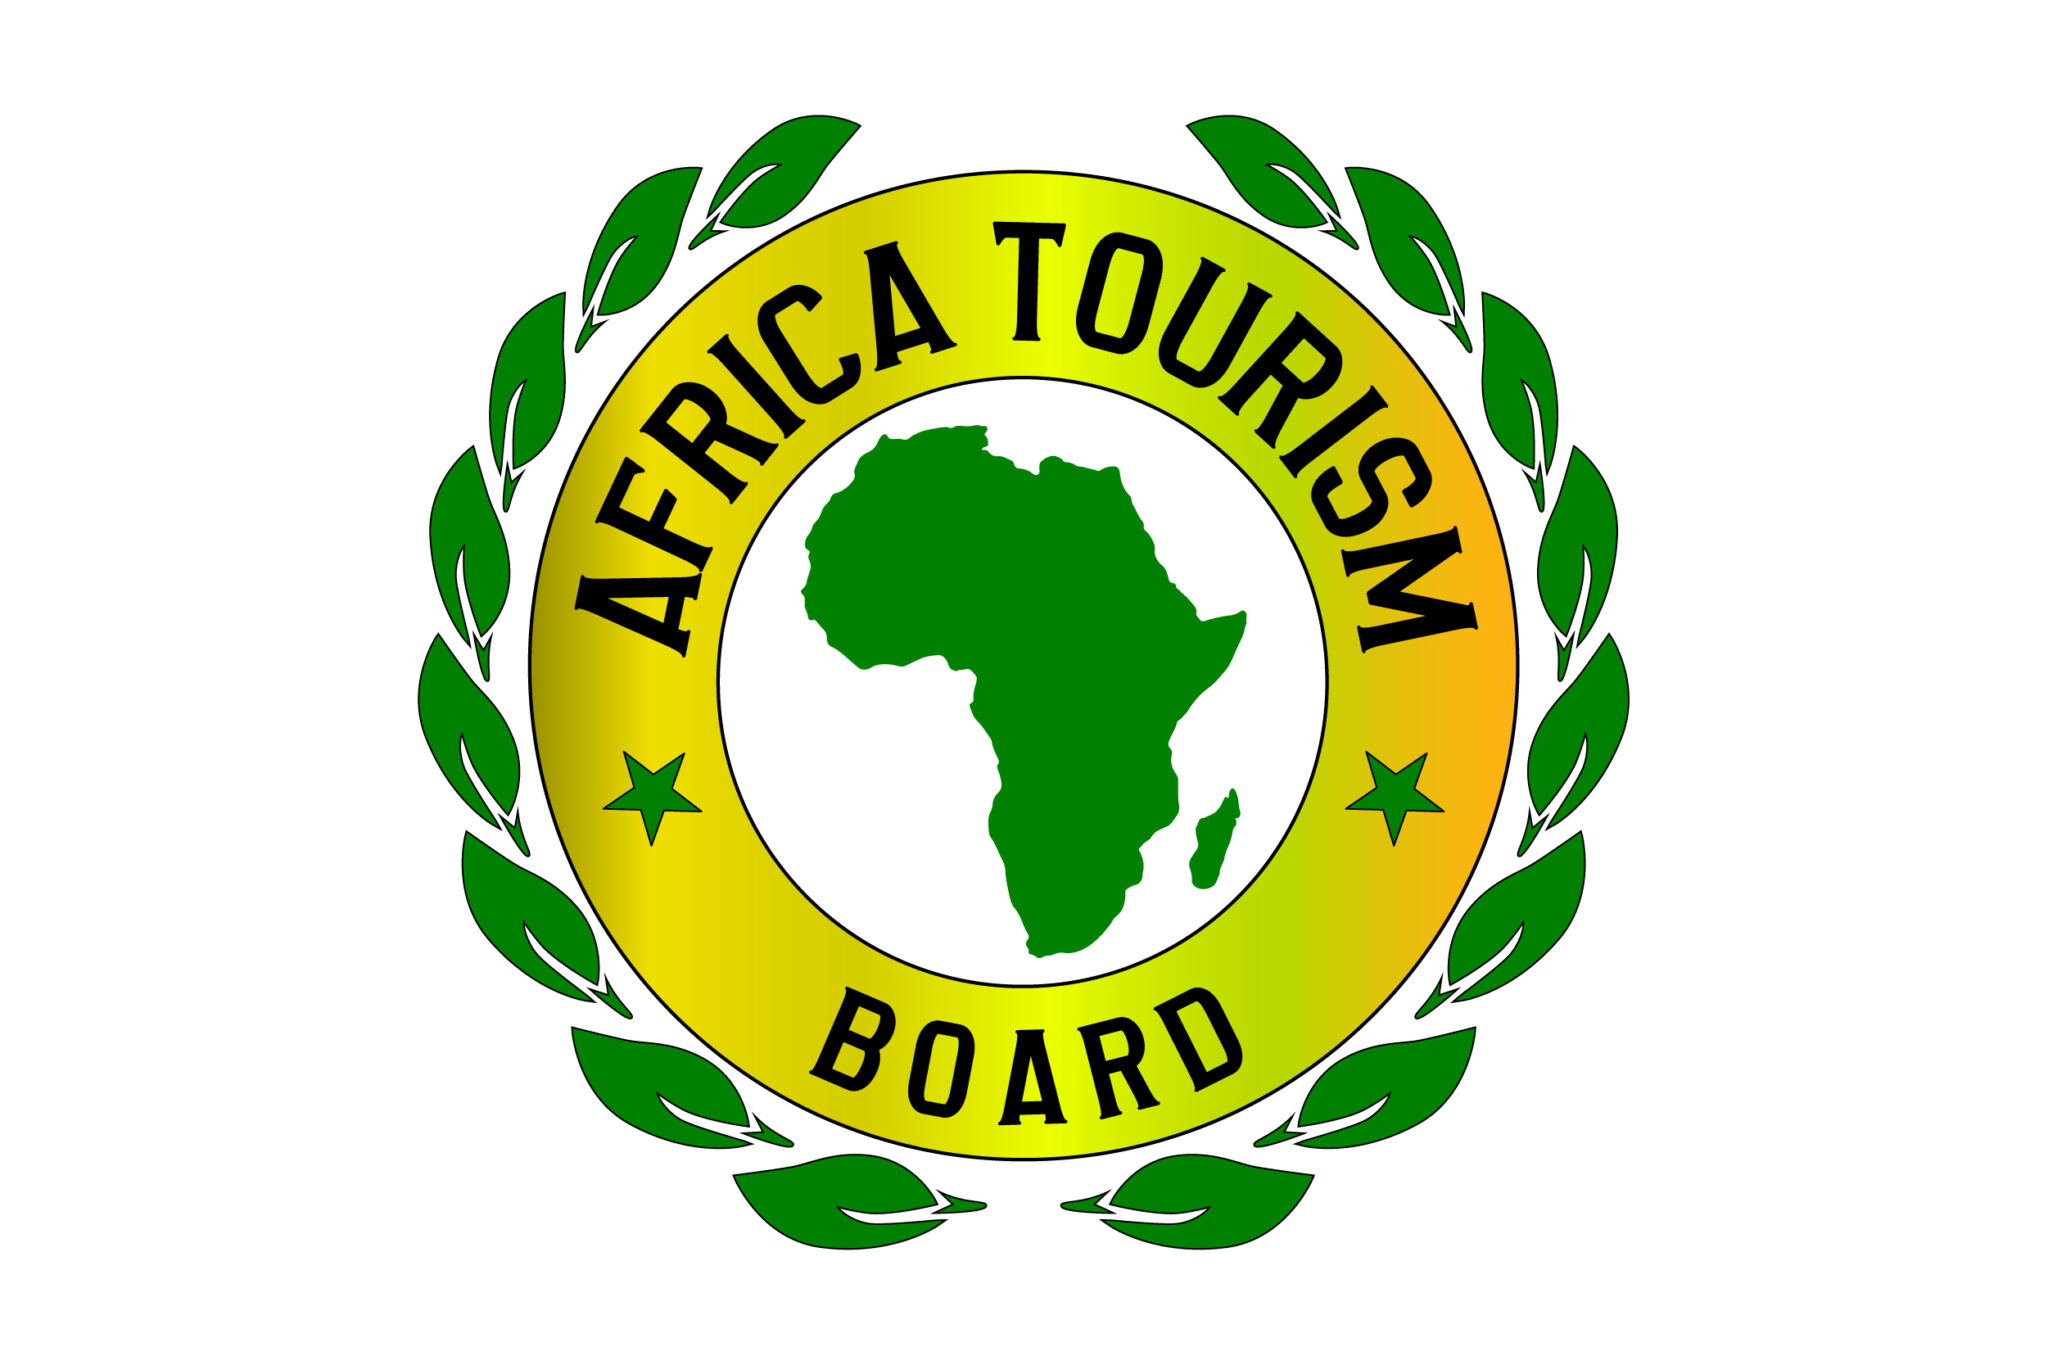 African Tourism Board (ATB) & Egyptian Junior Business Association Collaborate for Tourism